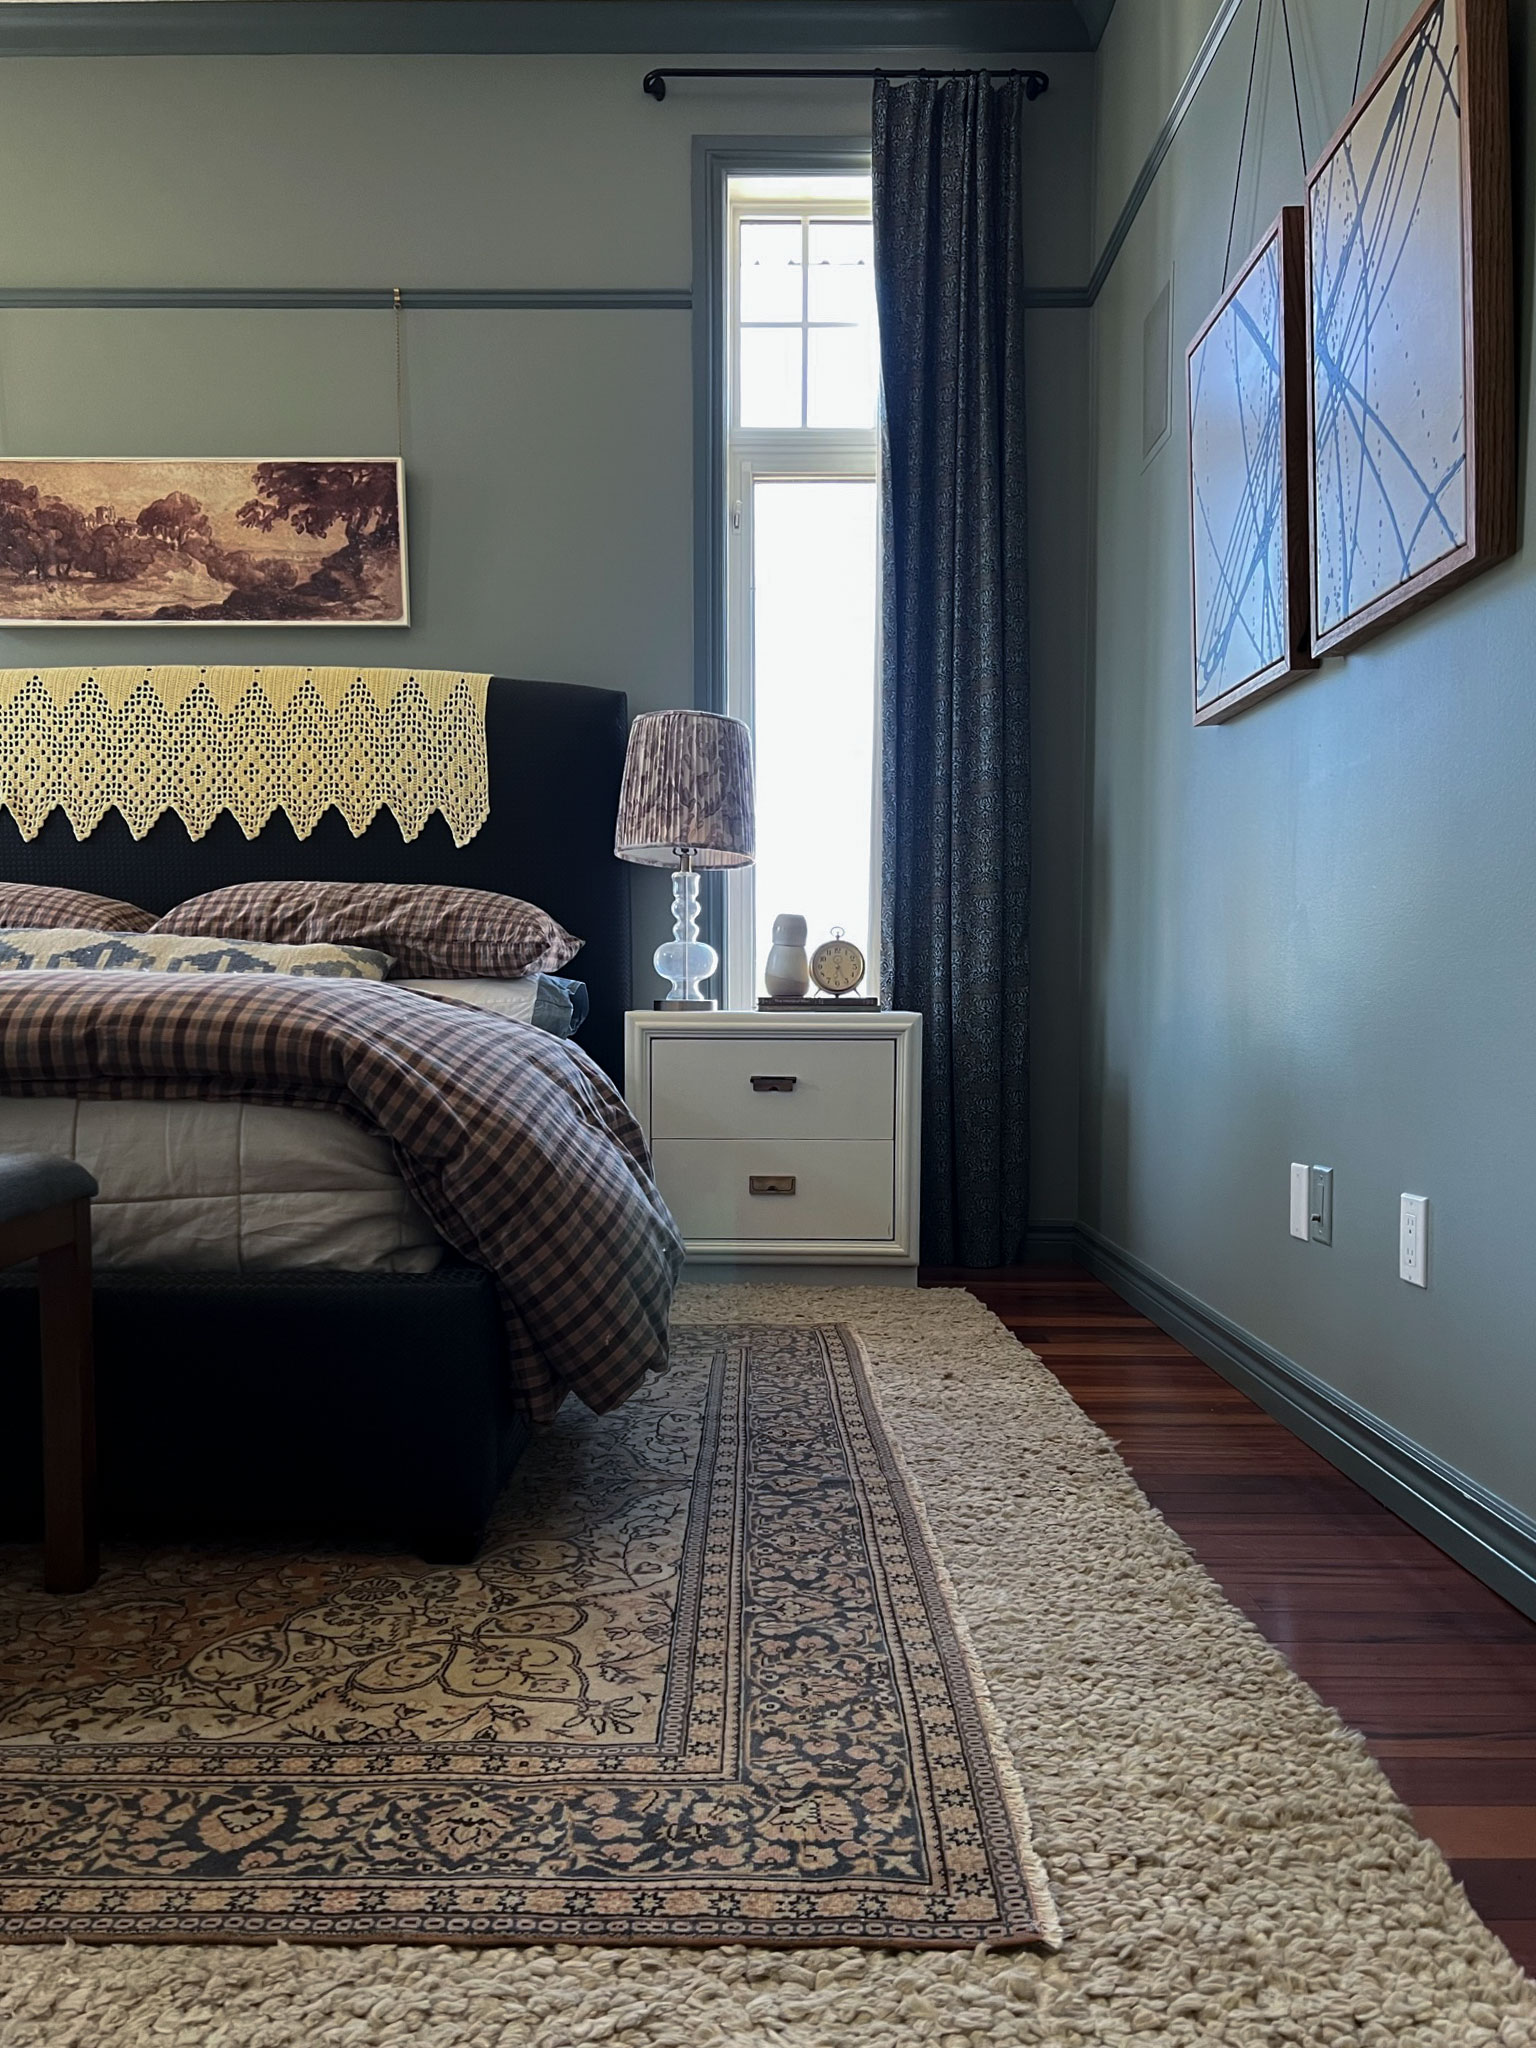 Bedroom with pale green walls and darker green trim, picture rail, beige and brown checkered bedding, black bed, bench at the end of the bed with two layered wool rugs. White nightstands.